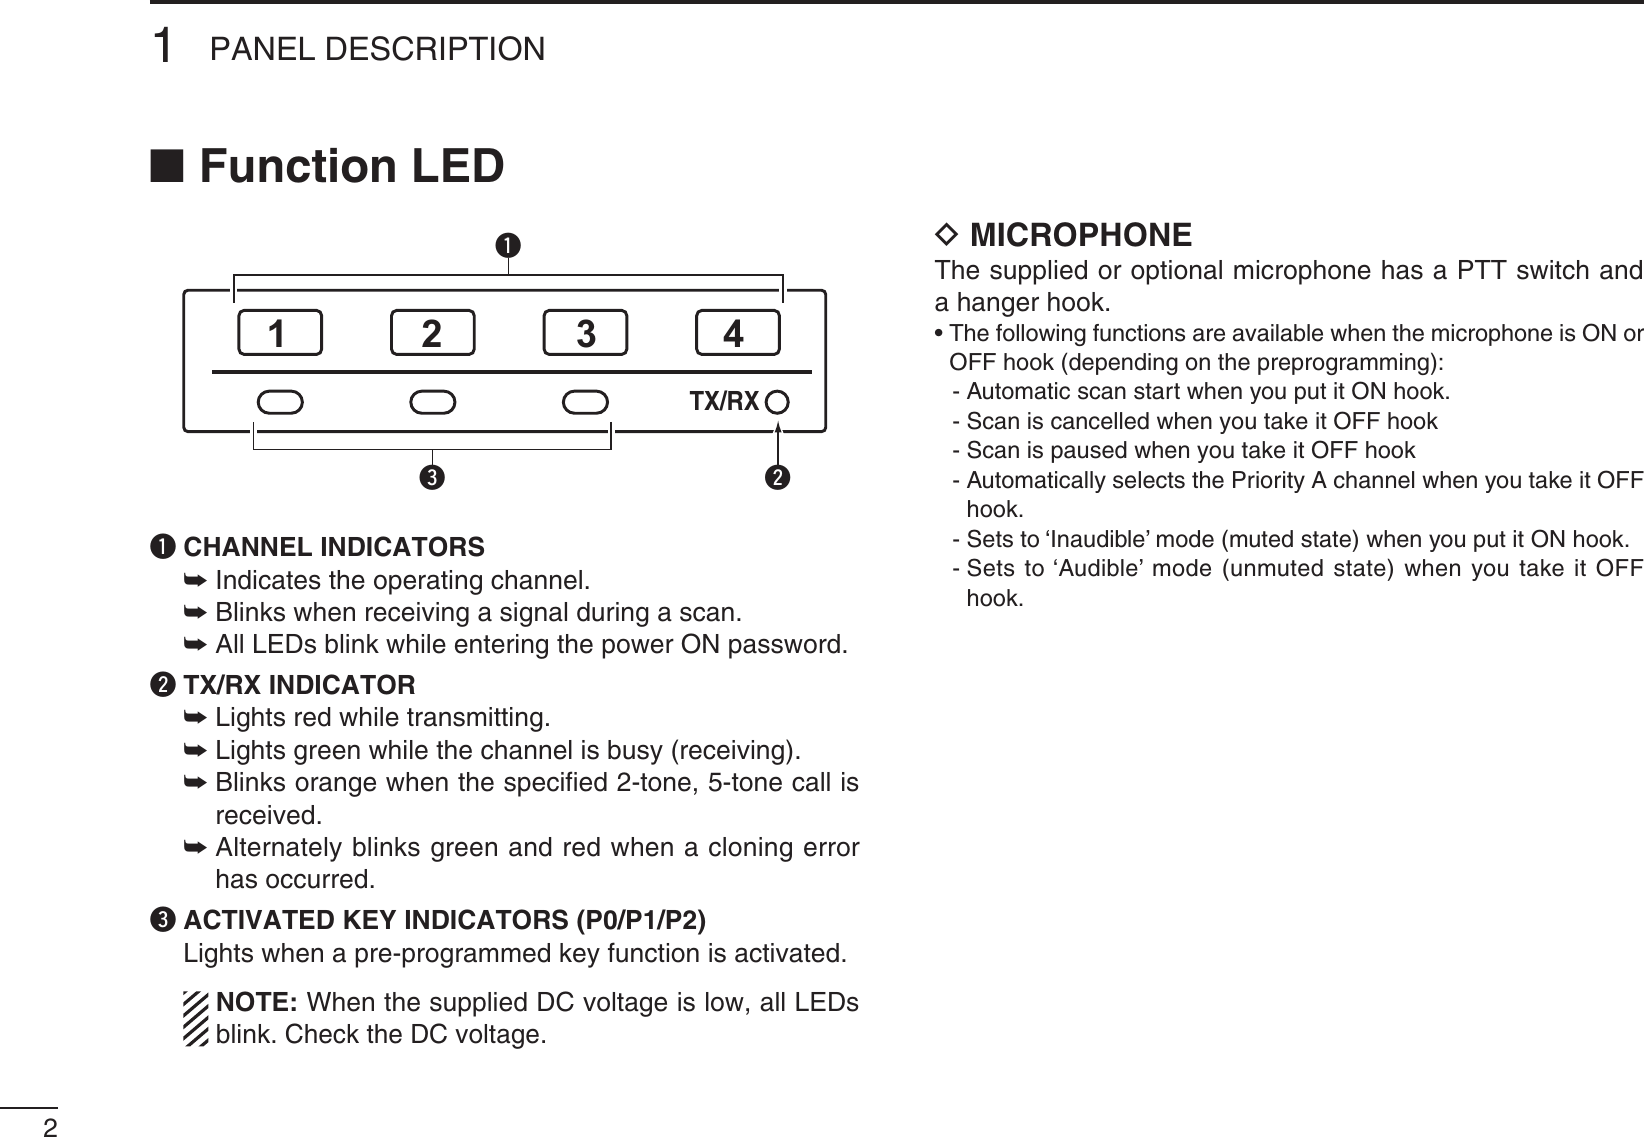 21PANEL DESCRIPTIONN Function LEDq CHANNEL INDICATORS±  Indicates the operating channel.±  Blinks when receiving a signal during a scan.±  All LEDs blink while entering the power ON password.w TX/RX INDICATOR±  Lights red while transmitting.±  Lights green while the channel is busy (receiving).±  Blinks orange when the speciﬁed 2-tone, 5-tone call is received.±  Alternately blinks green and red when a cloning error has occurred.e ACTIVATED KEY INDICATORS (P0/P1/P2)Lights when a pre-programmed key function is activated.   ./4% When the supplied DC voltage is low, all LEDs blink. Check the DC voltage.D MICROPHONEThe supplied or optional microphone has a PTT switch and a hanger hook.s4HEFOLLOWINGFUNCTIONSAREAVAILABLEWHENTHEMICROPHONEIS/.OROFF hook (depending on the preprogramming): -  Automatic scan start when you put it ON hook.  - Scan is cancelled when you take it OFF hook  - Scan is paused when you take it OFF hook -  Automatically selects the Priority A channel when you take it OFF hook. -  Sets to ‘Inaudible’ mode (muted state) when you put it ON hook. -  Sets to ‘Audible’ mode (unmuted state) when you take it OFF hook.TX/RX1234qwe